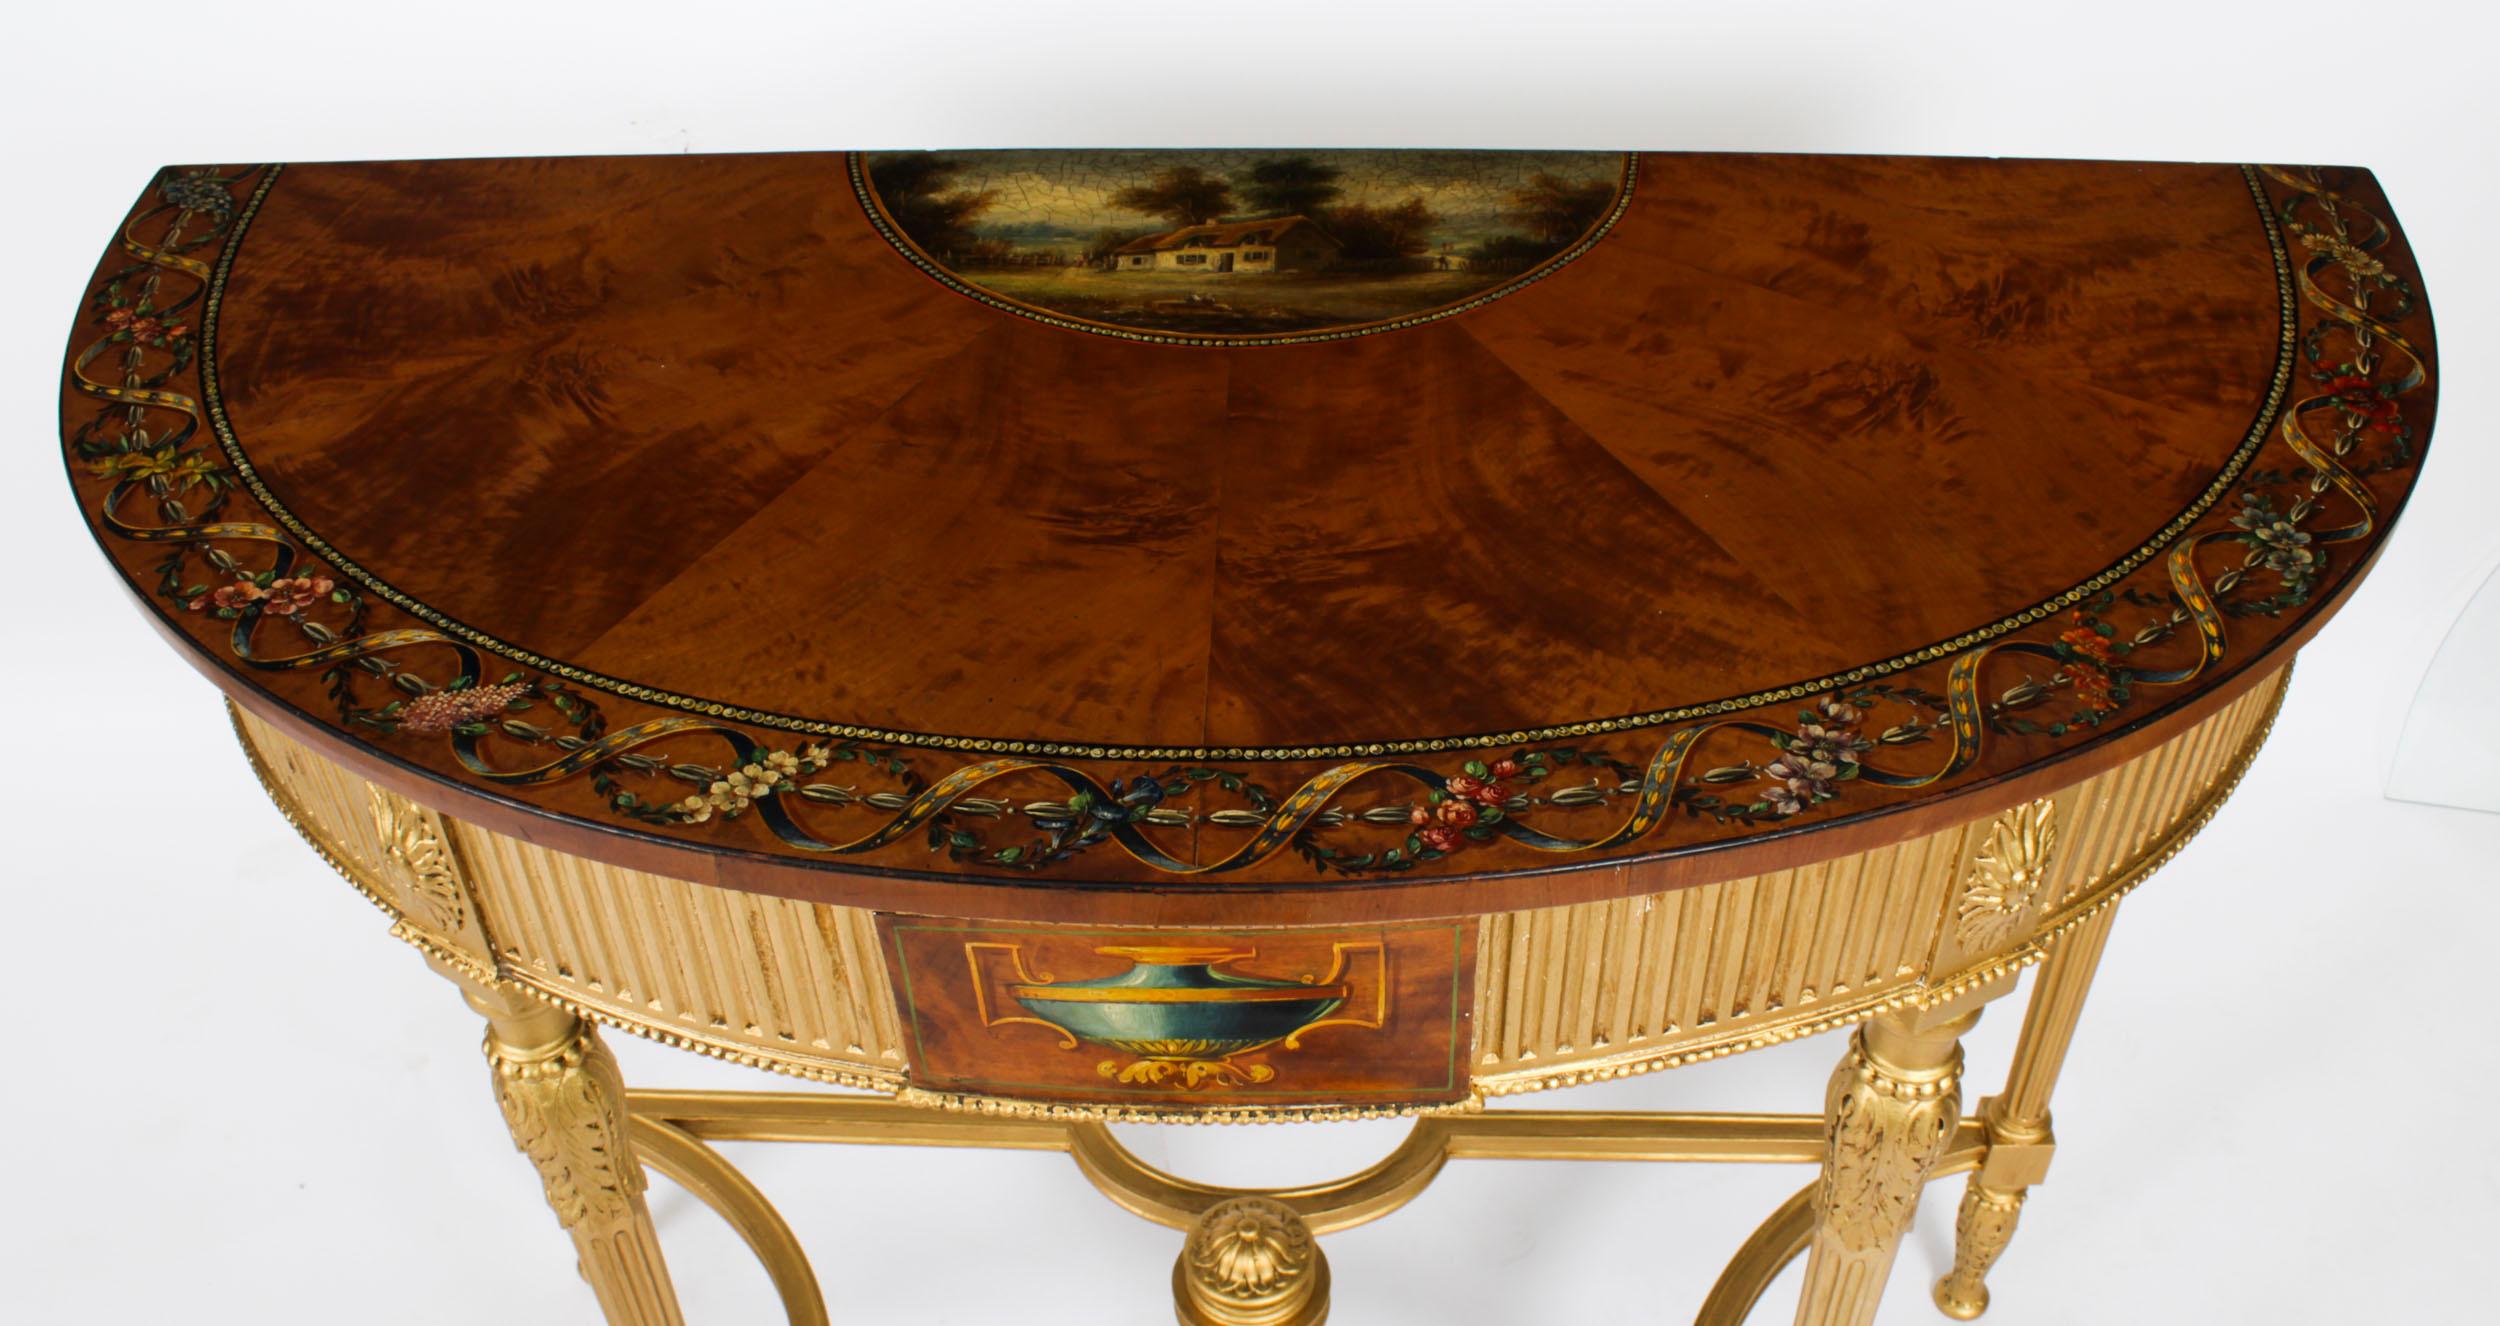 This is a elegant antique satinwood hand painted giltwood demi-lune console table , Circa 1880 in date.
 
The demi lune top beautifully painted in the manner of Angelica Kauffman and features a landscape scene with a picturesque cottage and a